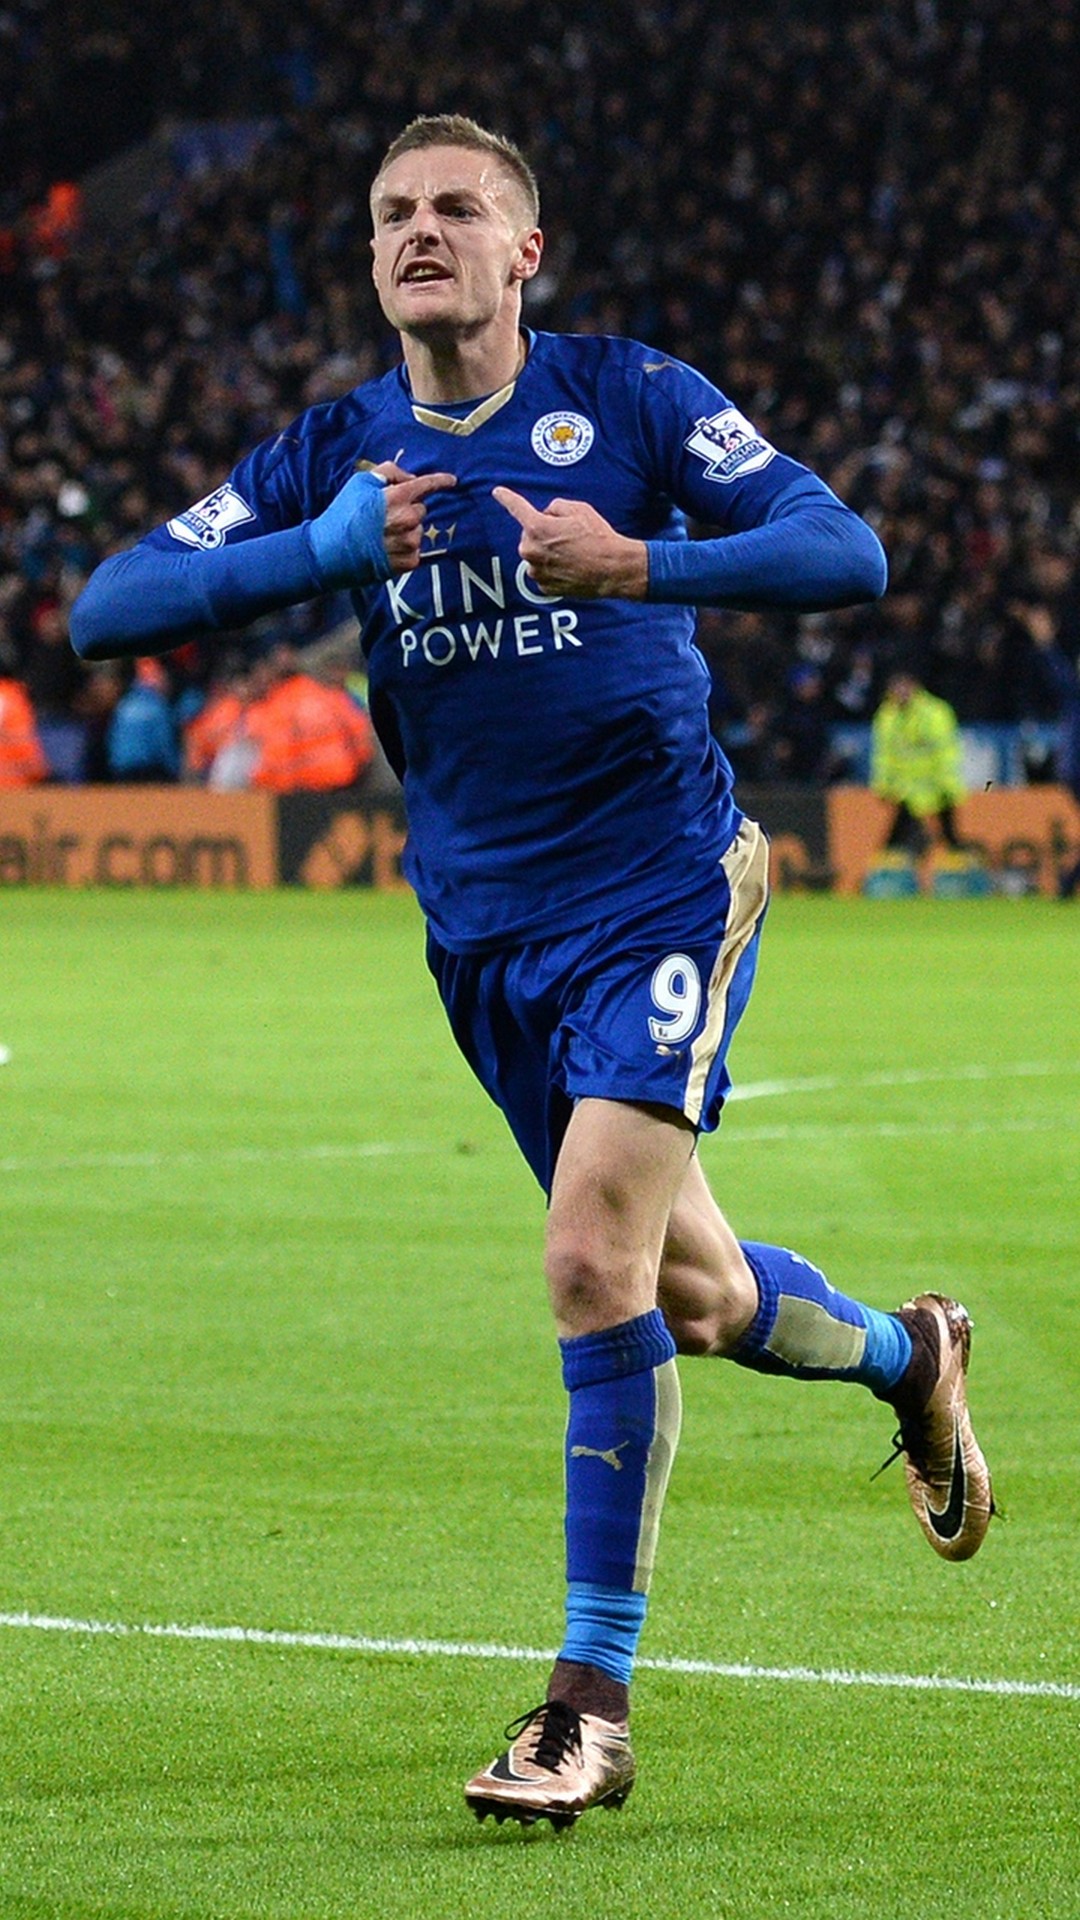 Jamie Vardy HD Wallpaper For iPhone With high-resolution 1080X1920 pixel. You can use this wallpaper for your Desktop Computers, Mac Screensavers, Windows Backgrounds, iPhone Wallpapers, Tablet or Android Lock screen and another Mobile device